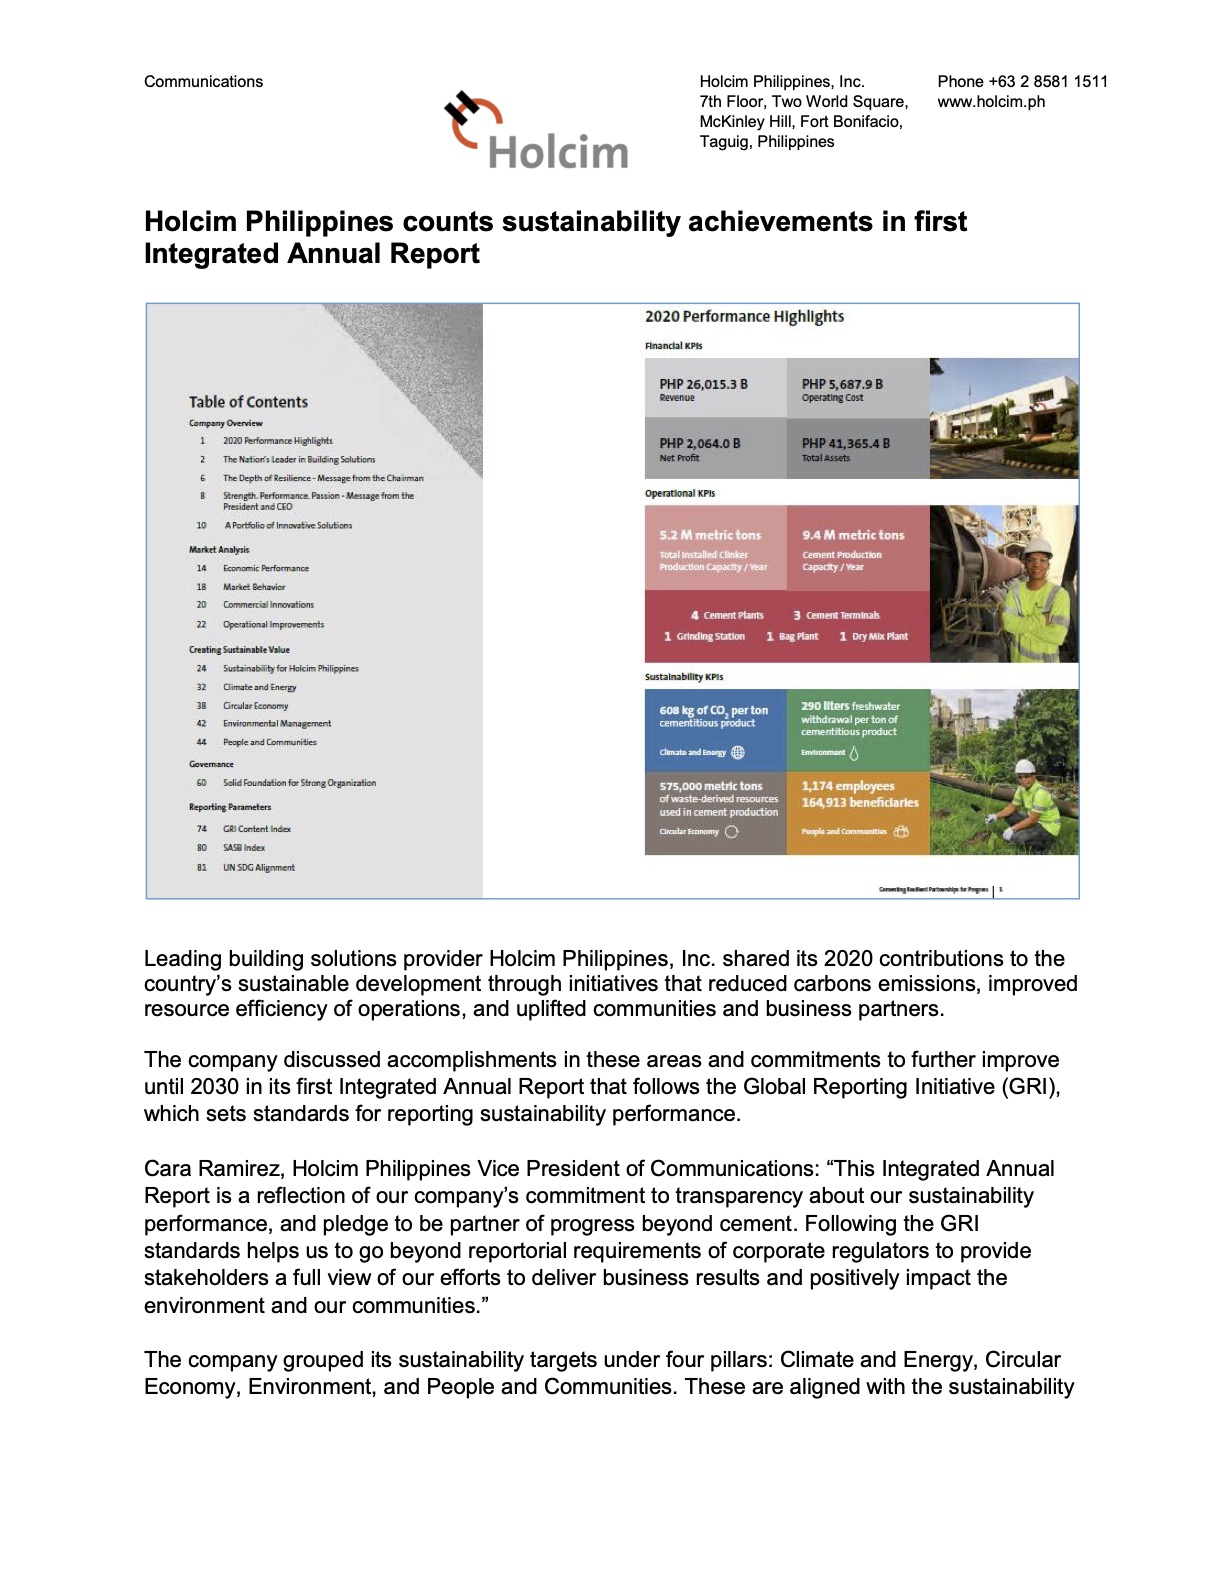 Holcim Philippines counts sustainability achievements in first Integrated Annual Report